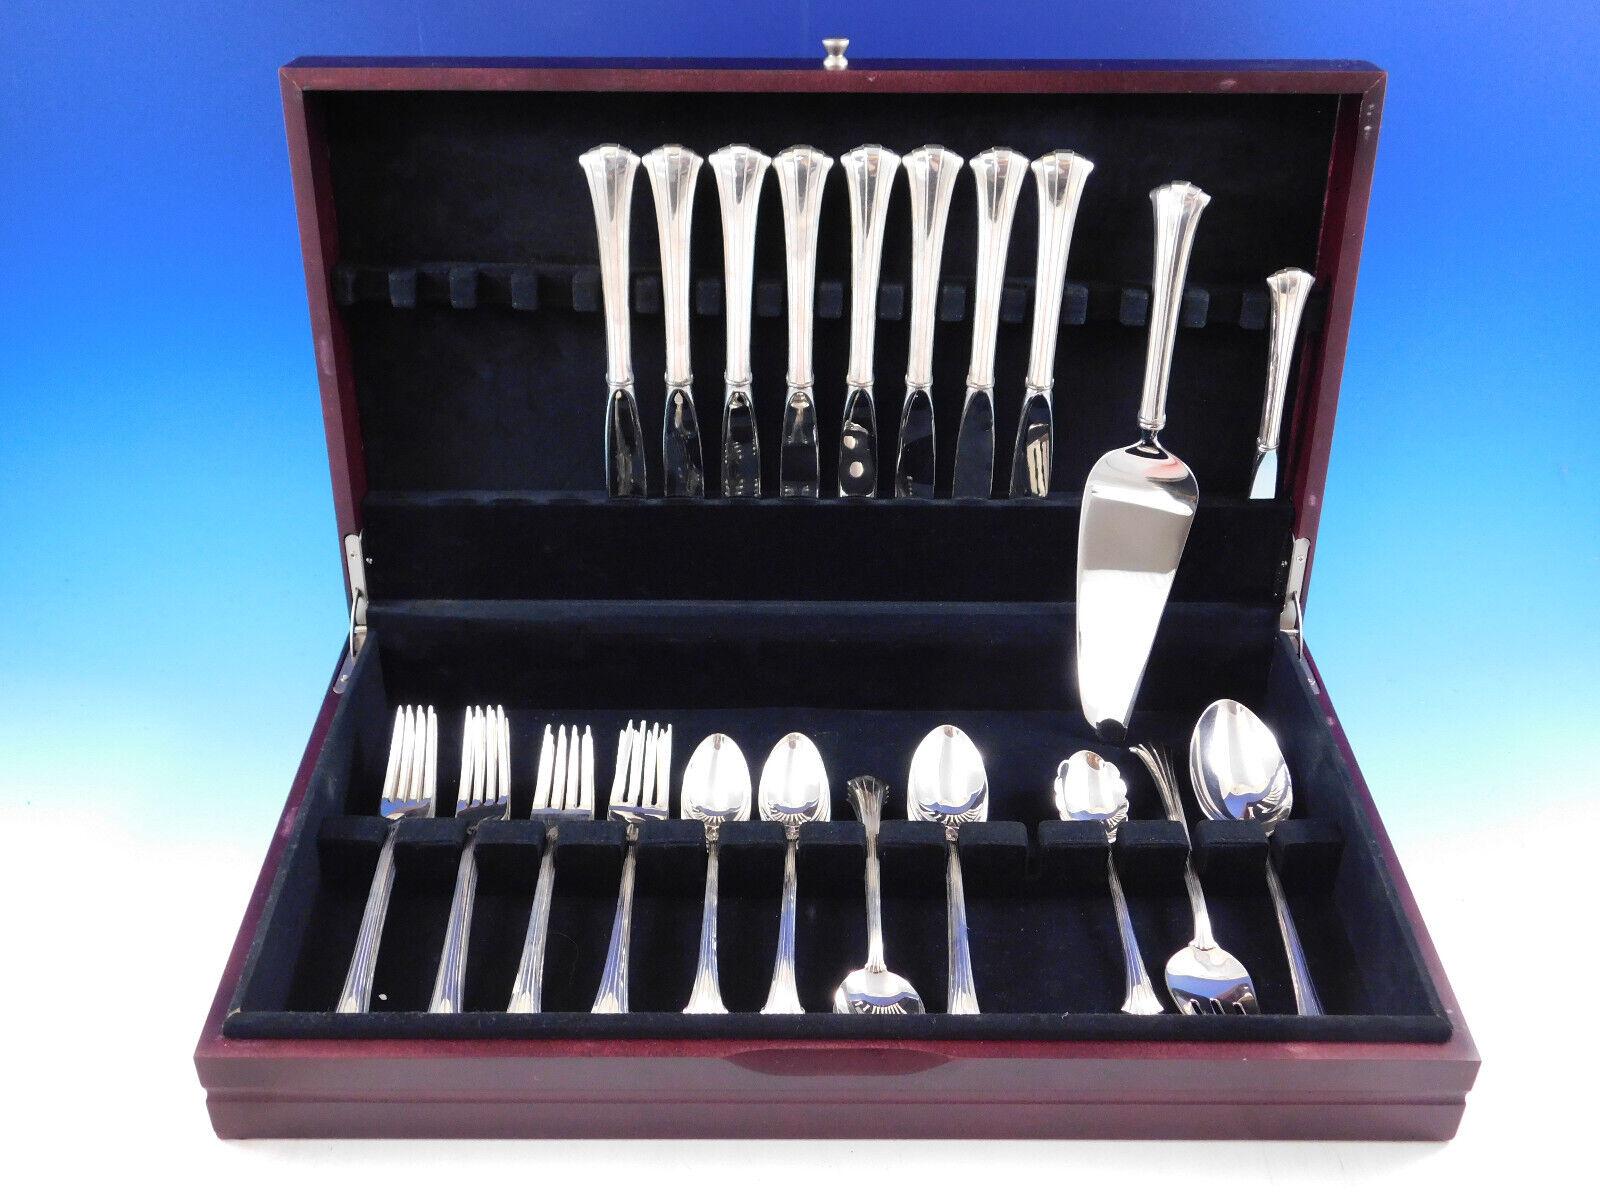 Gracefully curved lines distinguish Newport Scroll. The gently flared ends of each handle add a unique and interesting element to any table setting.
Newport Scroll by Gorham sterling silver Flatware set, 45 pieces. This set includes:
8 Place Size